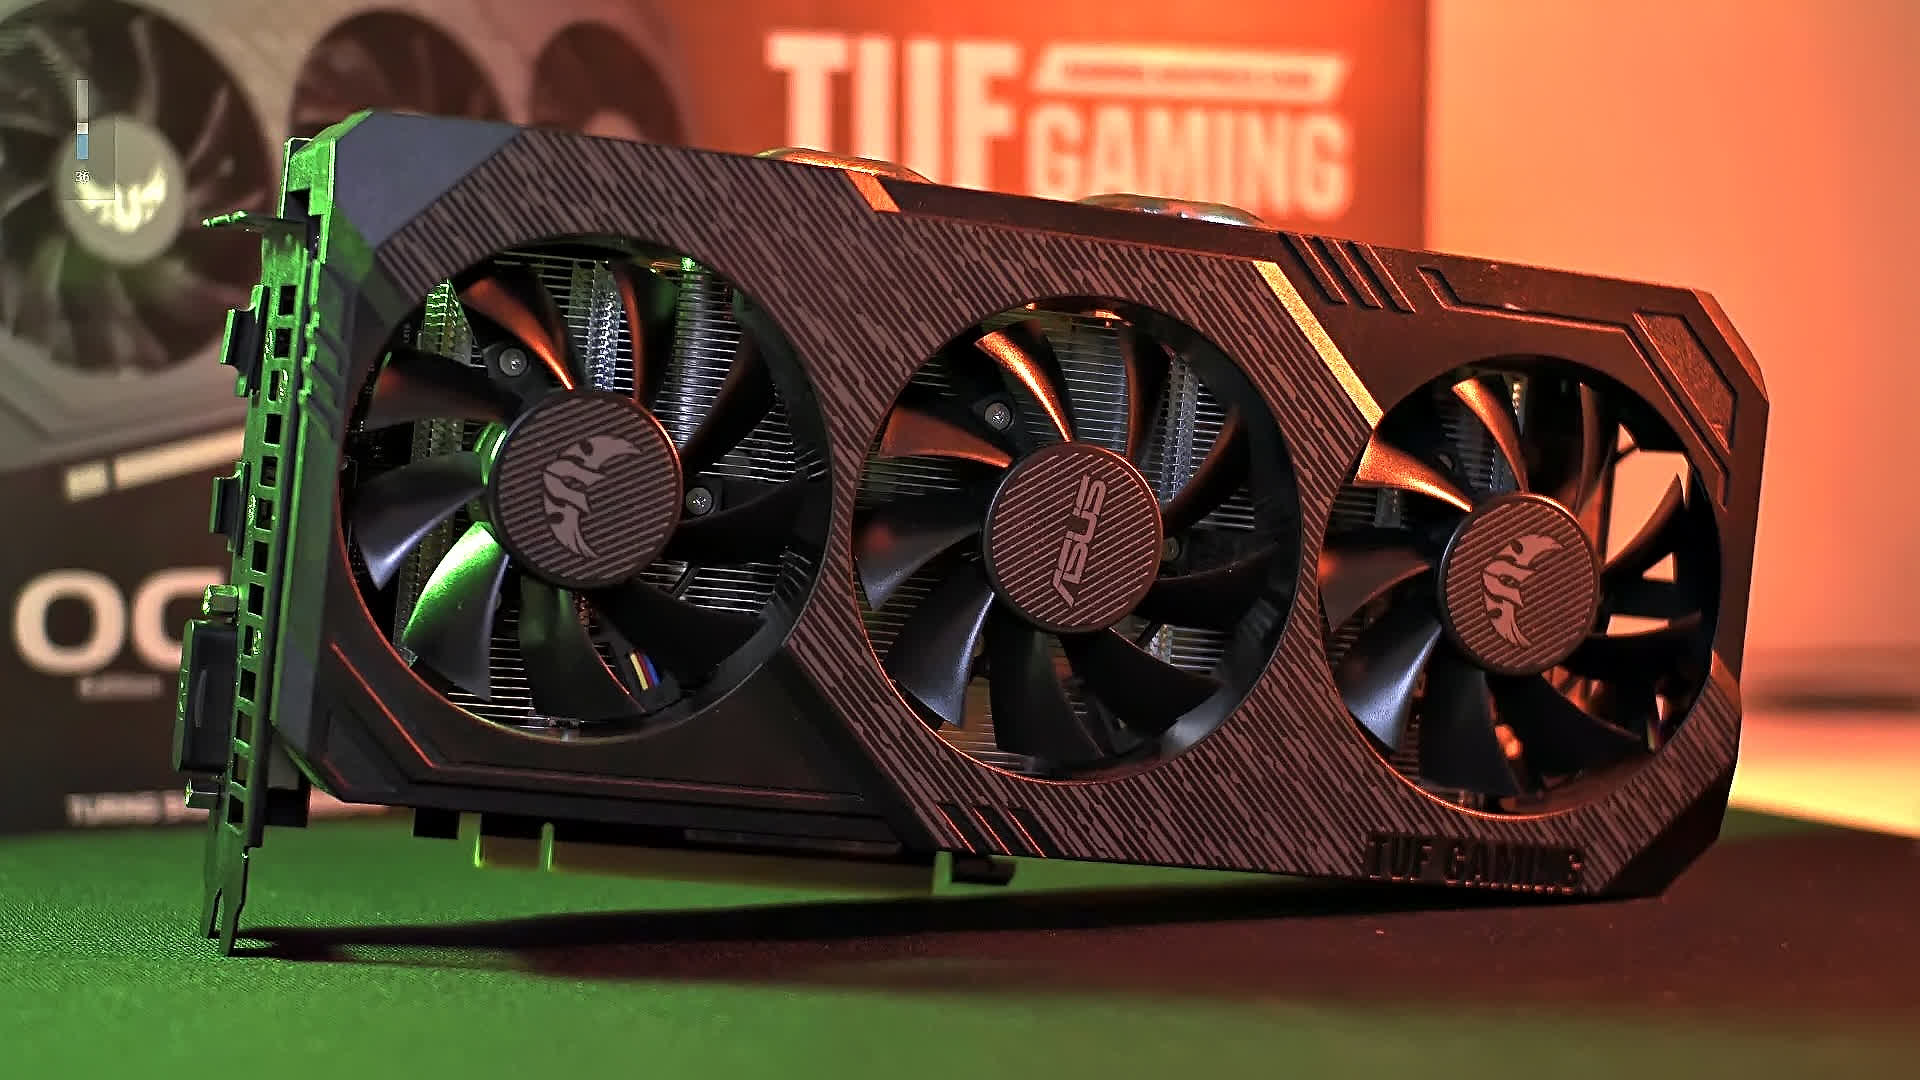 Asus is reportedly increasing the price of its graphics cards, again